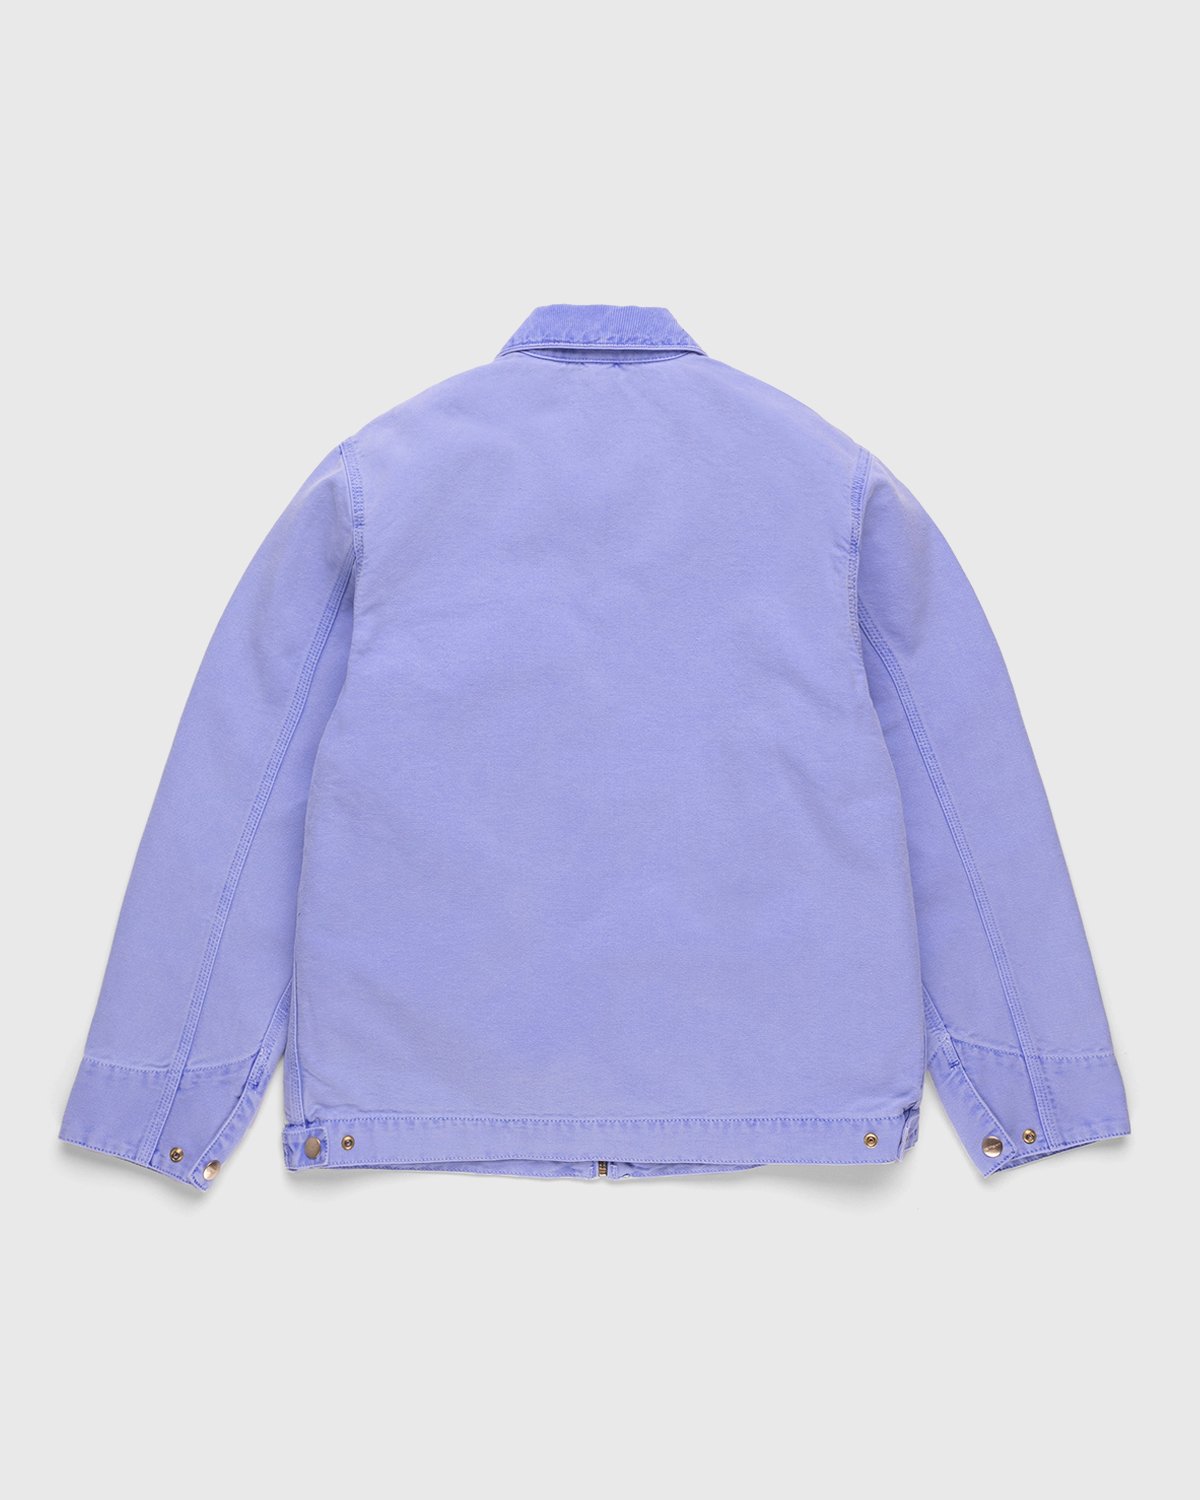 Carhartt WIP - Detroit Jacket Icy Water Faded - Clothing - Blue - Image 2